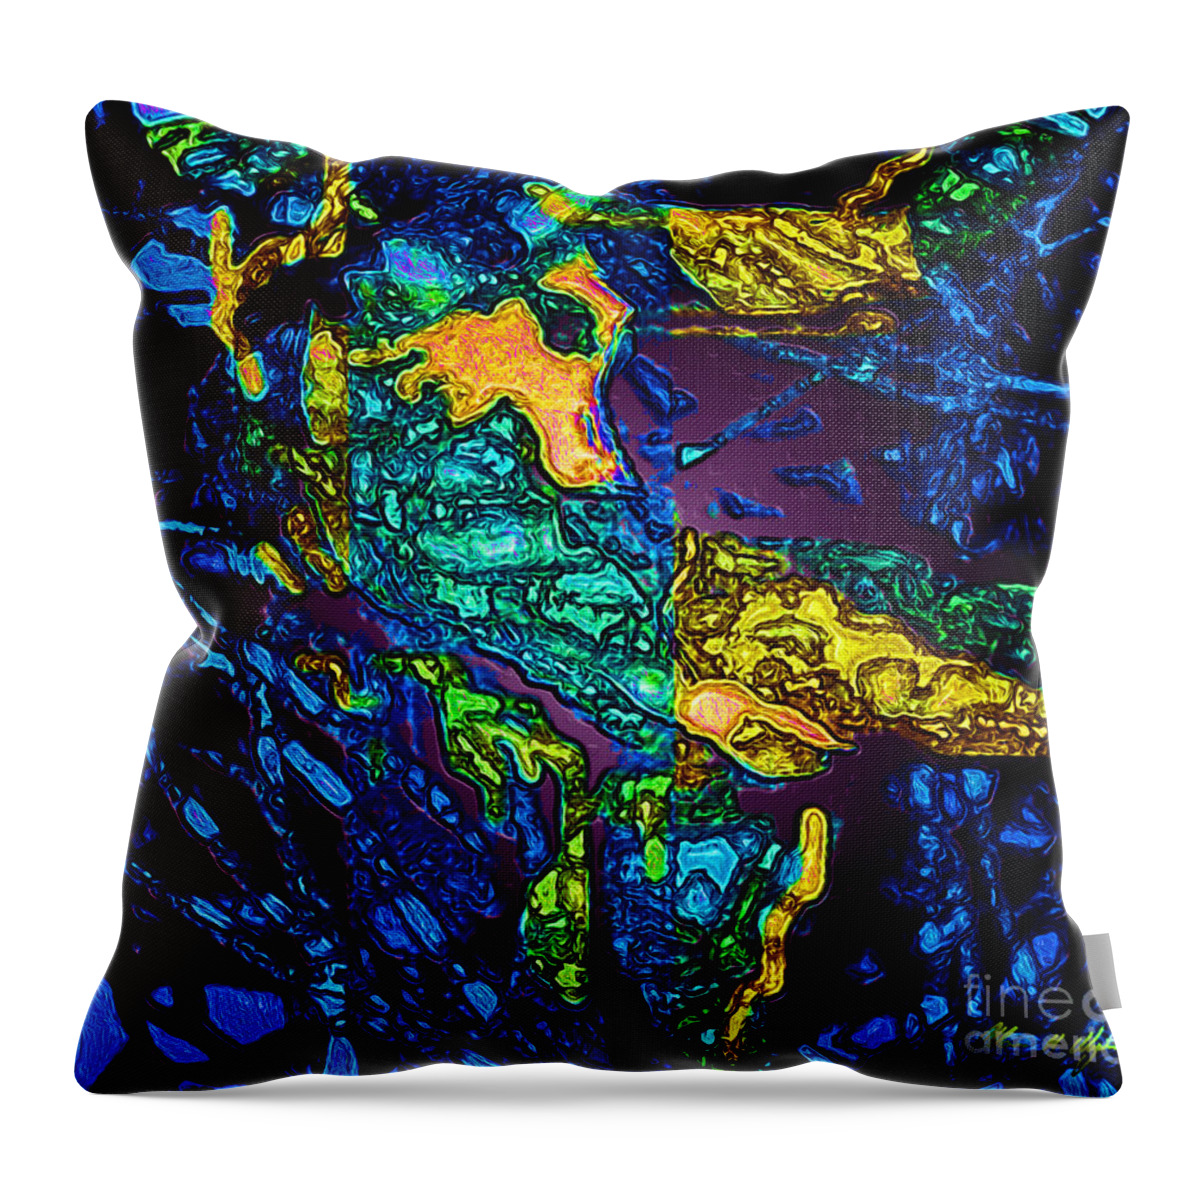 Tangled Transformation Throw Pillow featuring the digital art Tangled Transformation 3 by Aldane Wynter